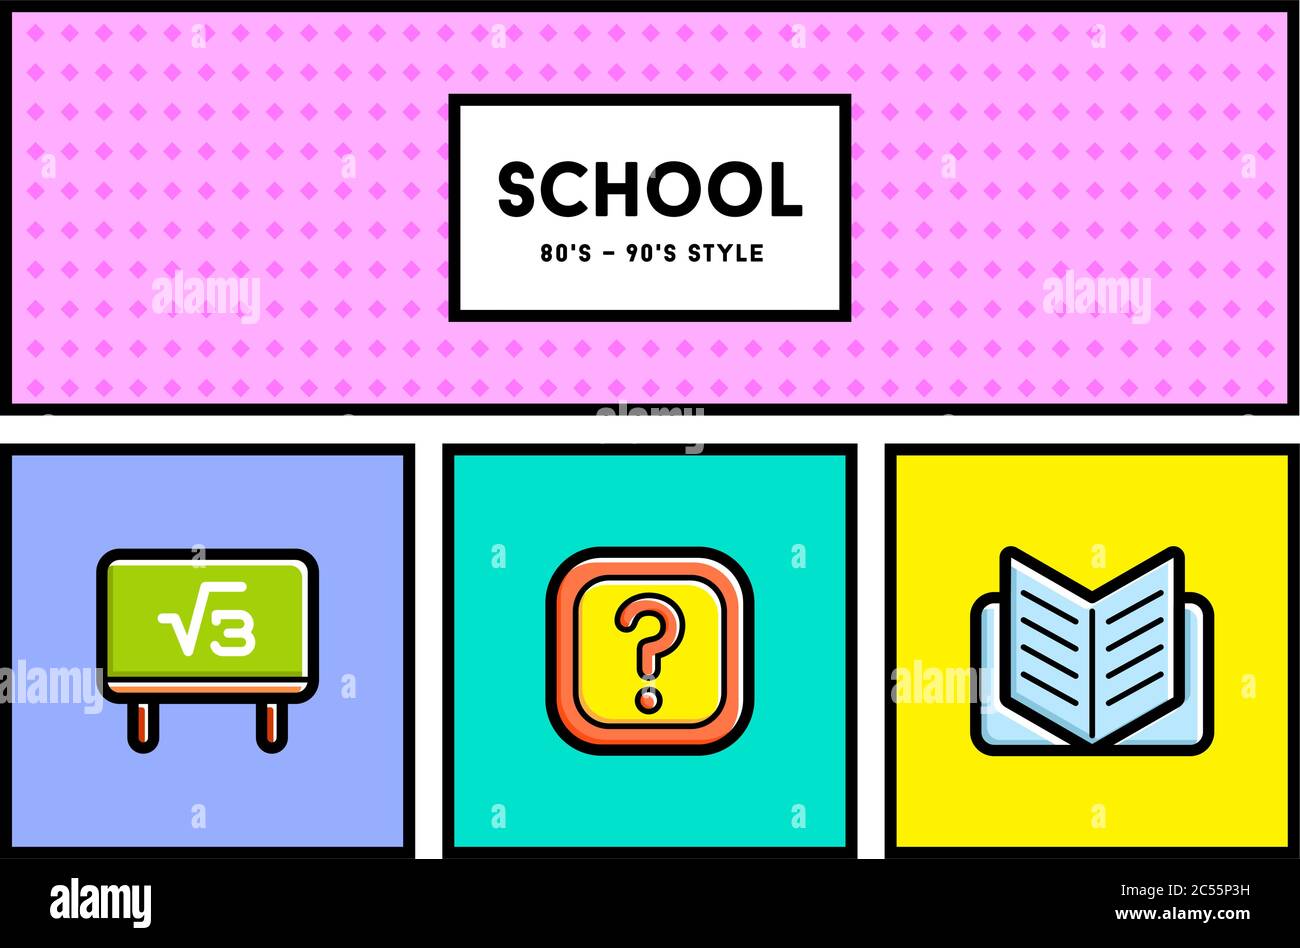 Vector 80's or 90's Stylish School Education Icon Set with Retro Colors Stock Vector